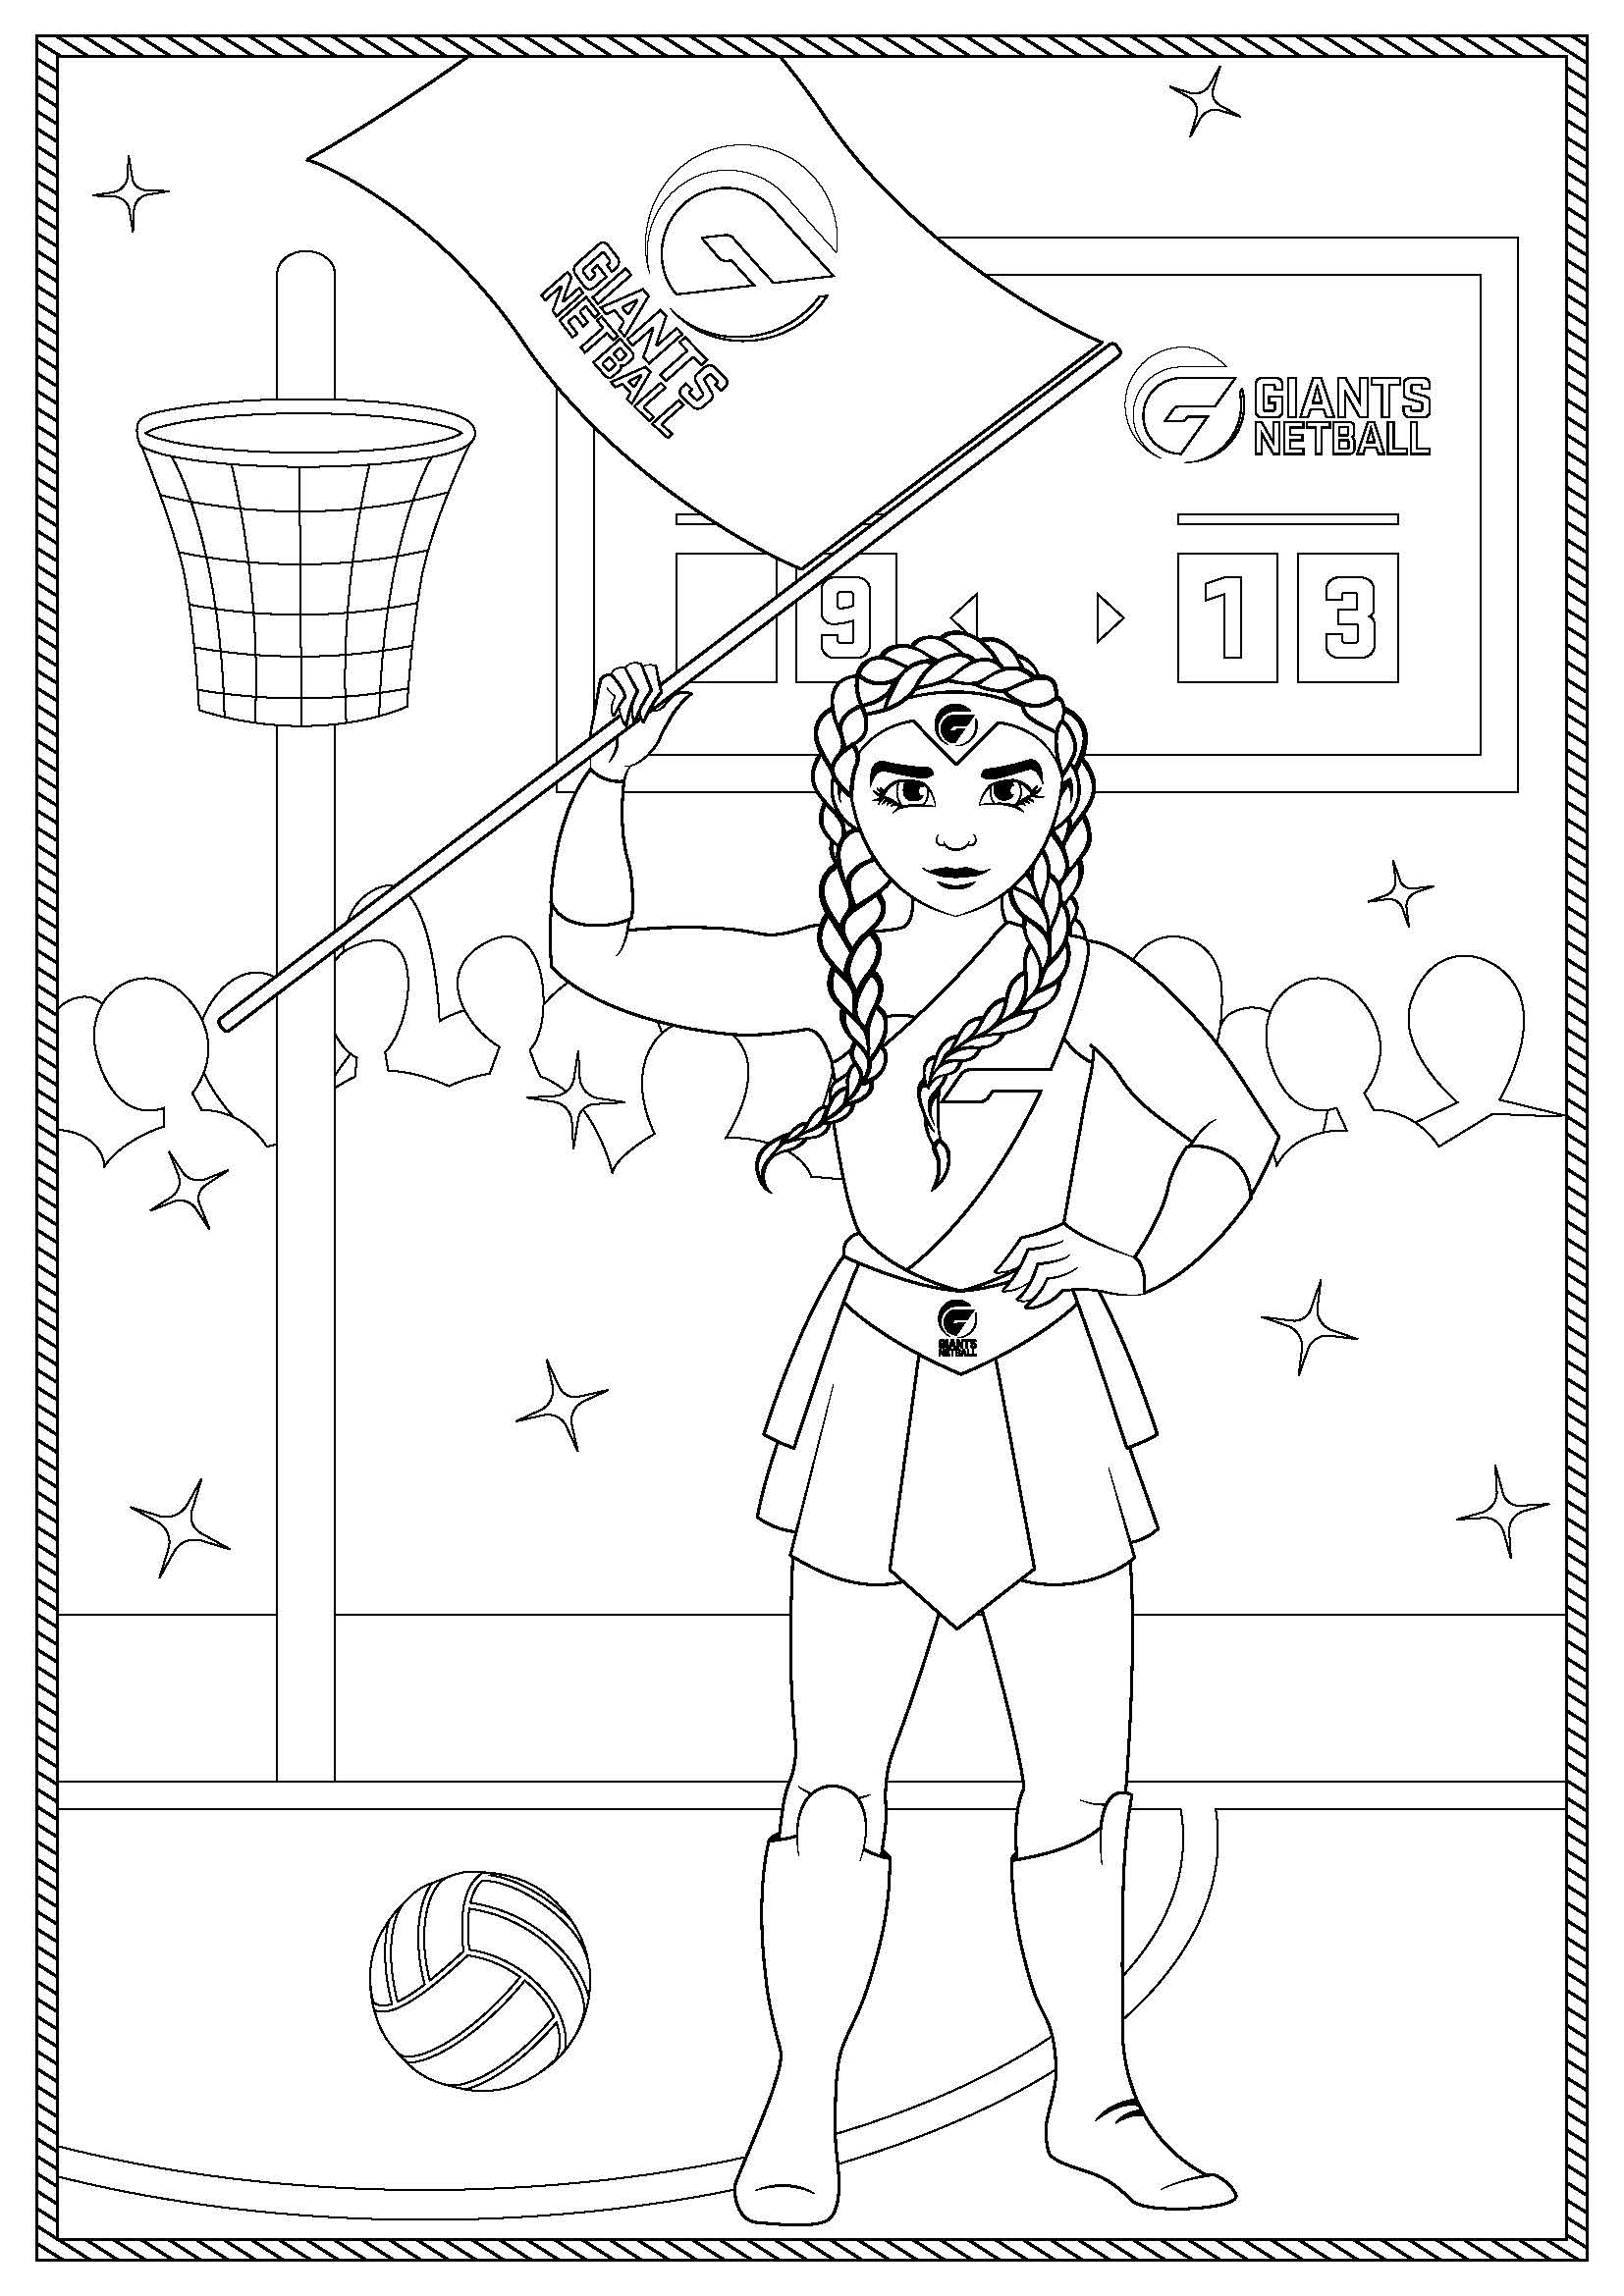 netball coloring pages to print